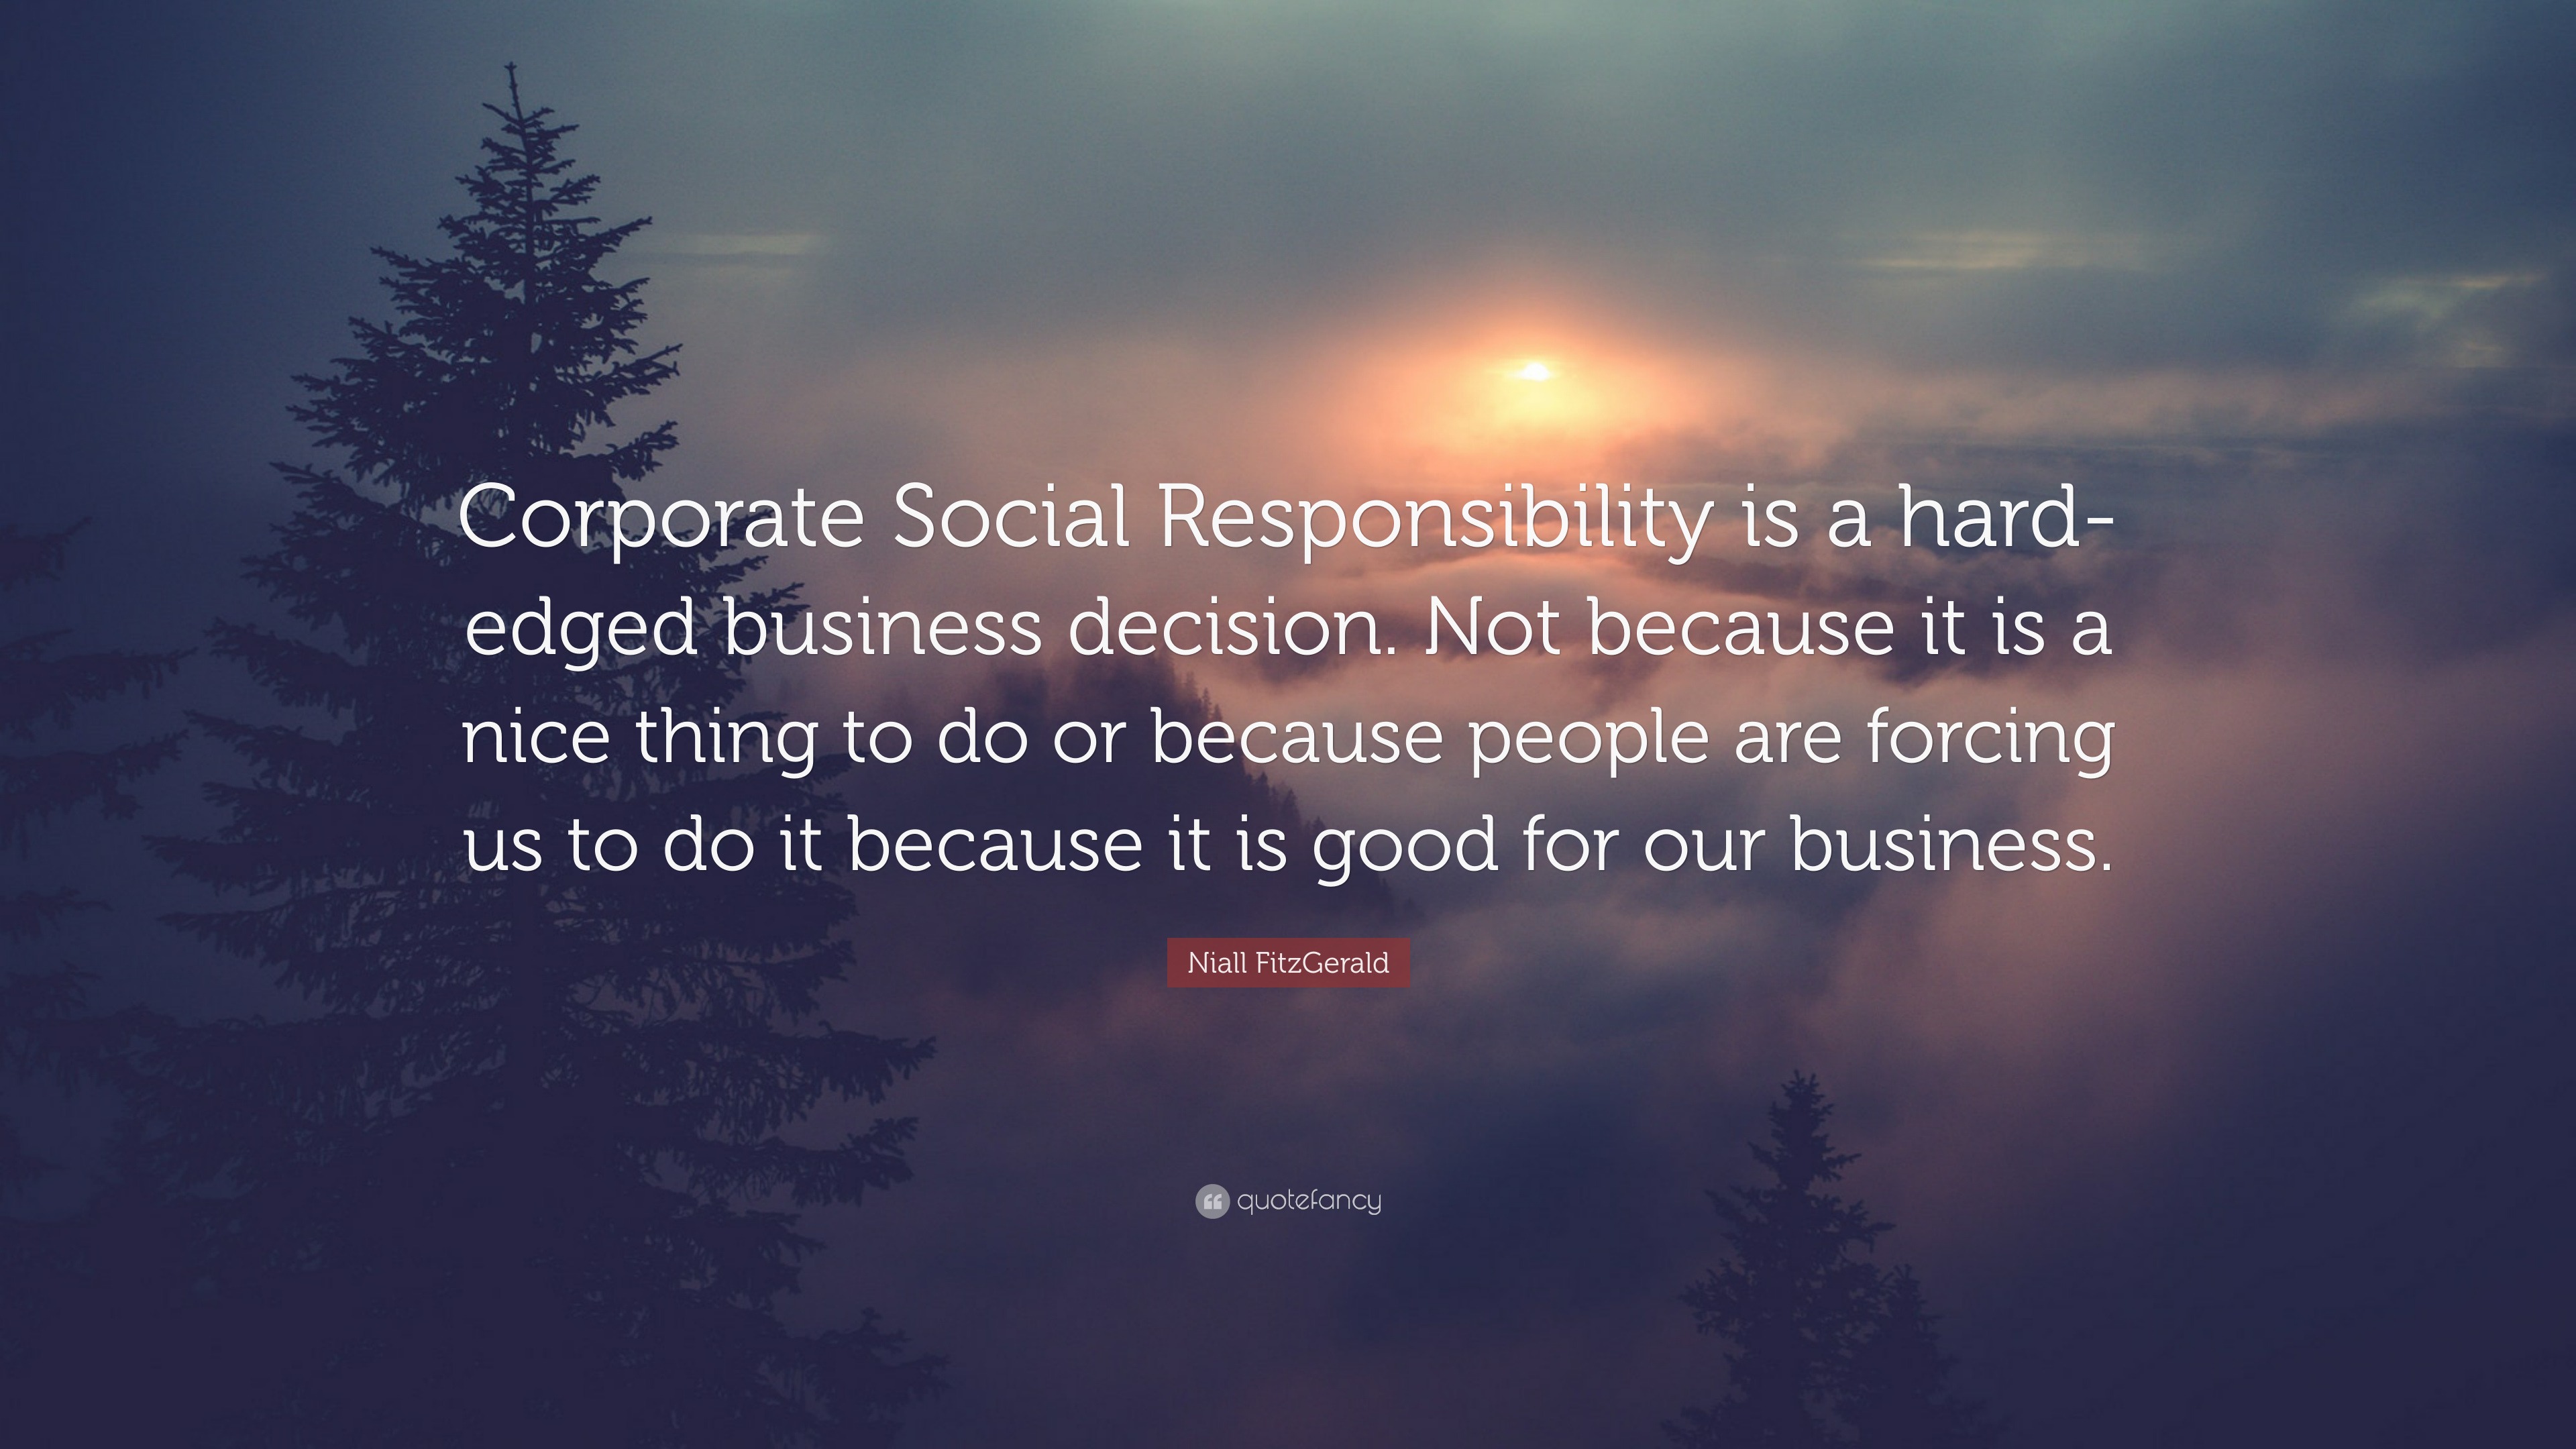 Niall FitzGerald Quote: “Corporate Social Responsibility is a hard